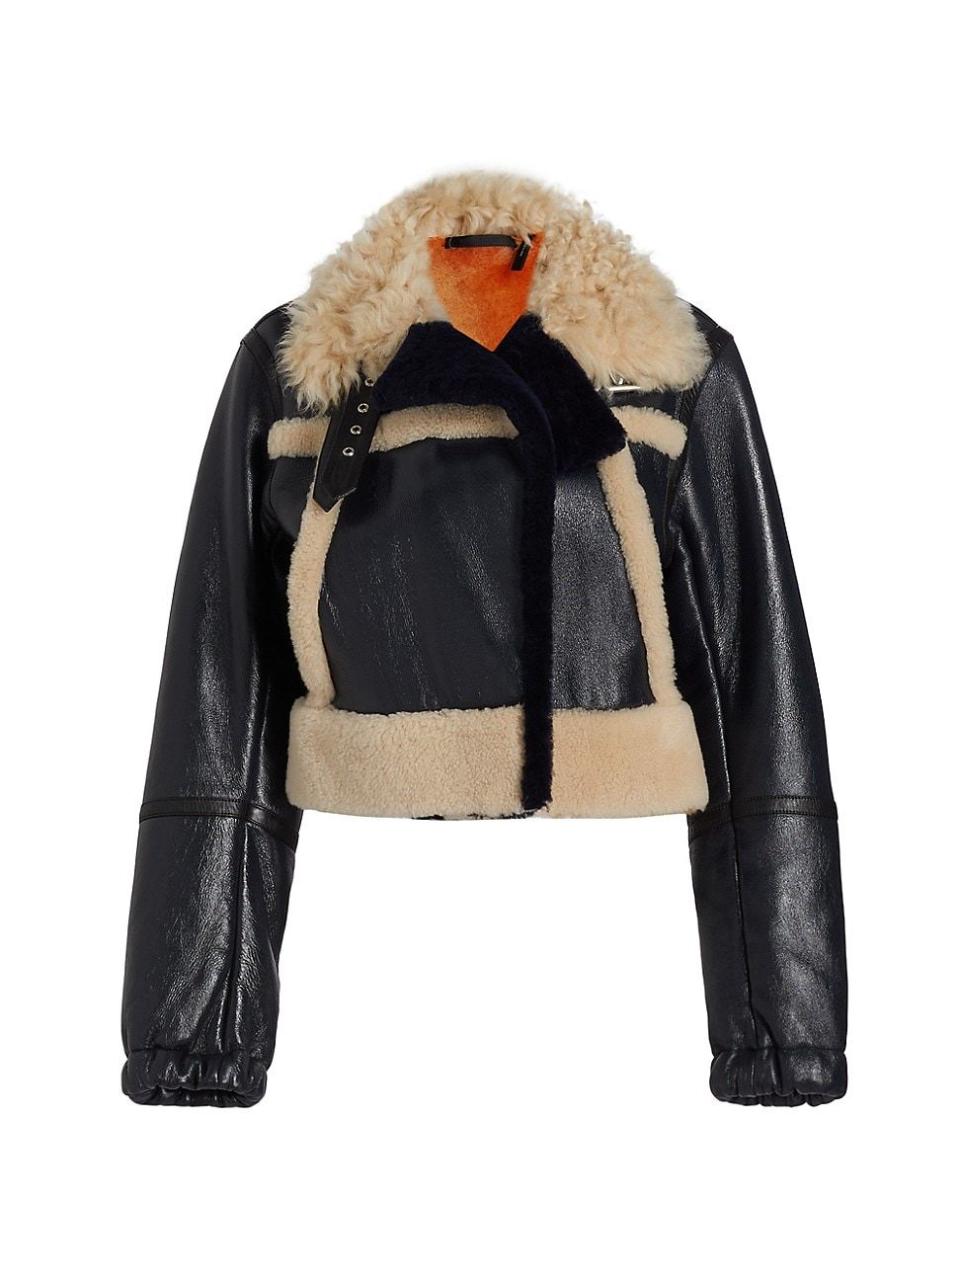 8) Cropped Leather & Shearling Jacket